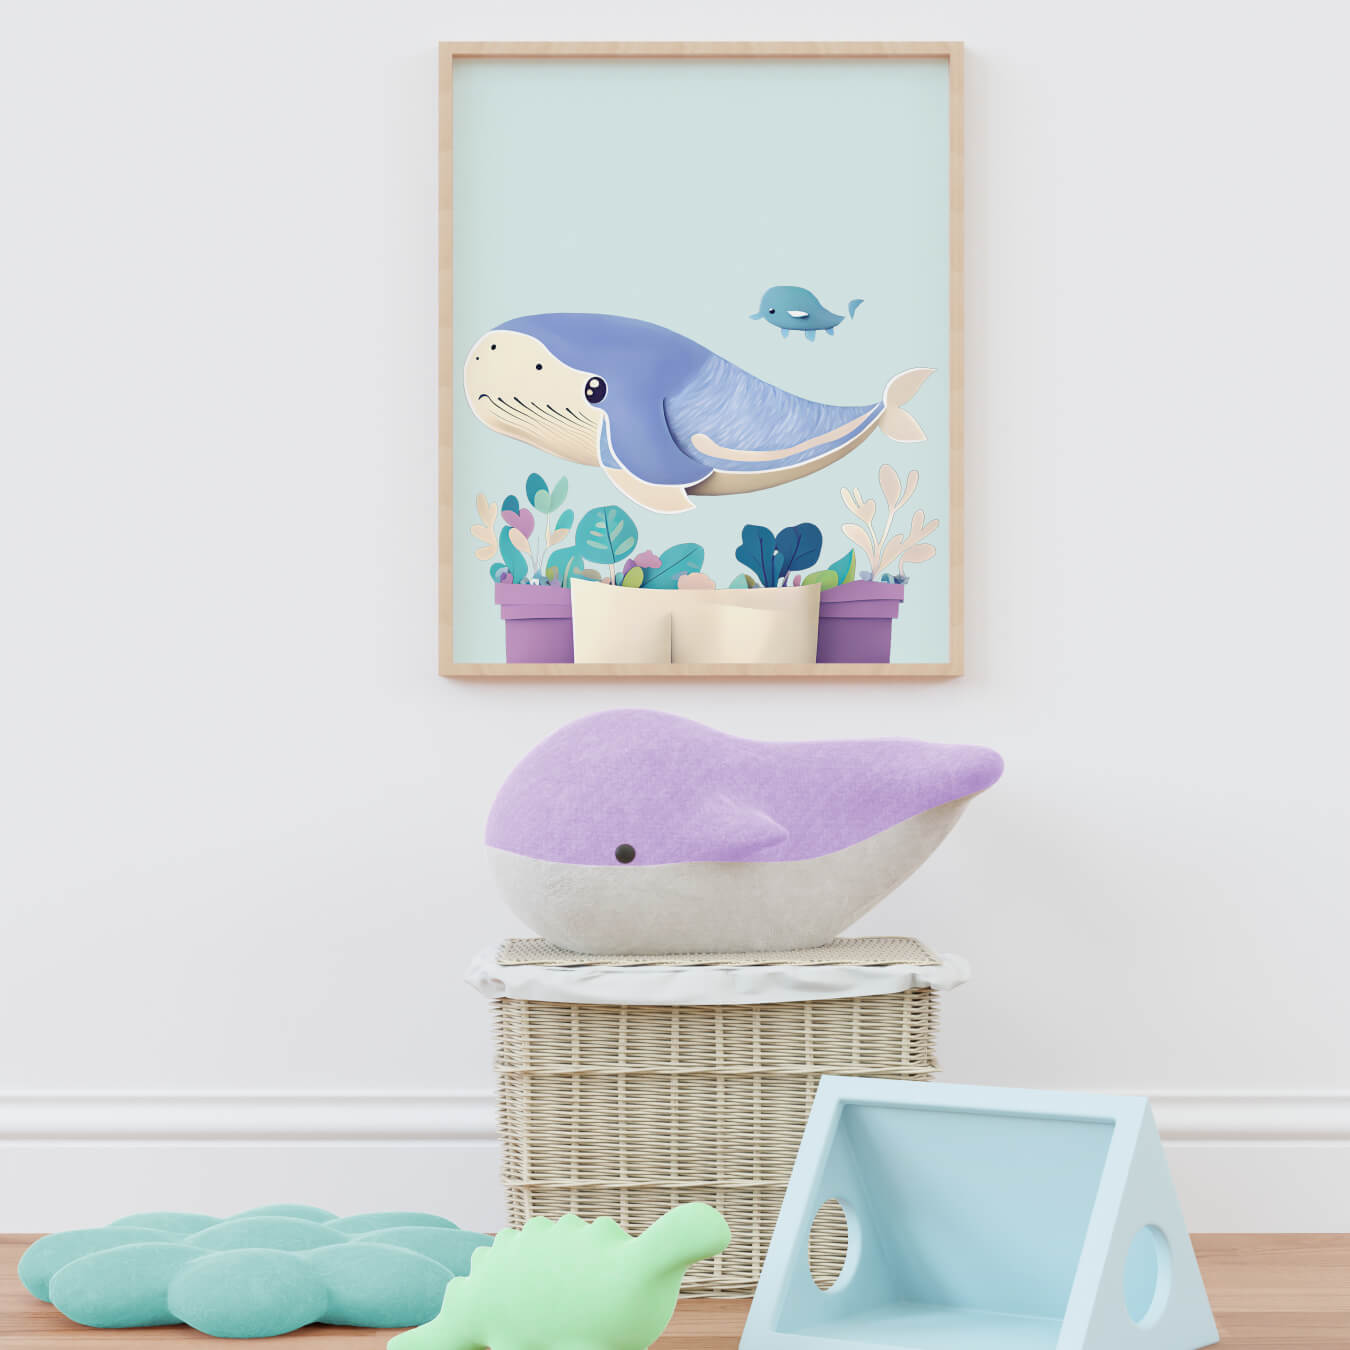 Blue Whale Print Collection - Wall Art Print Set of 2